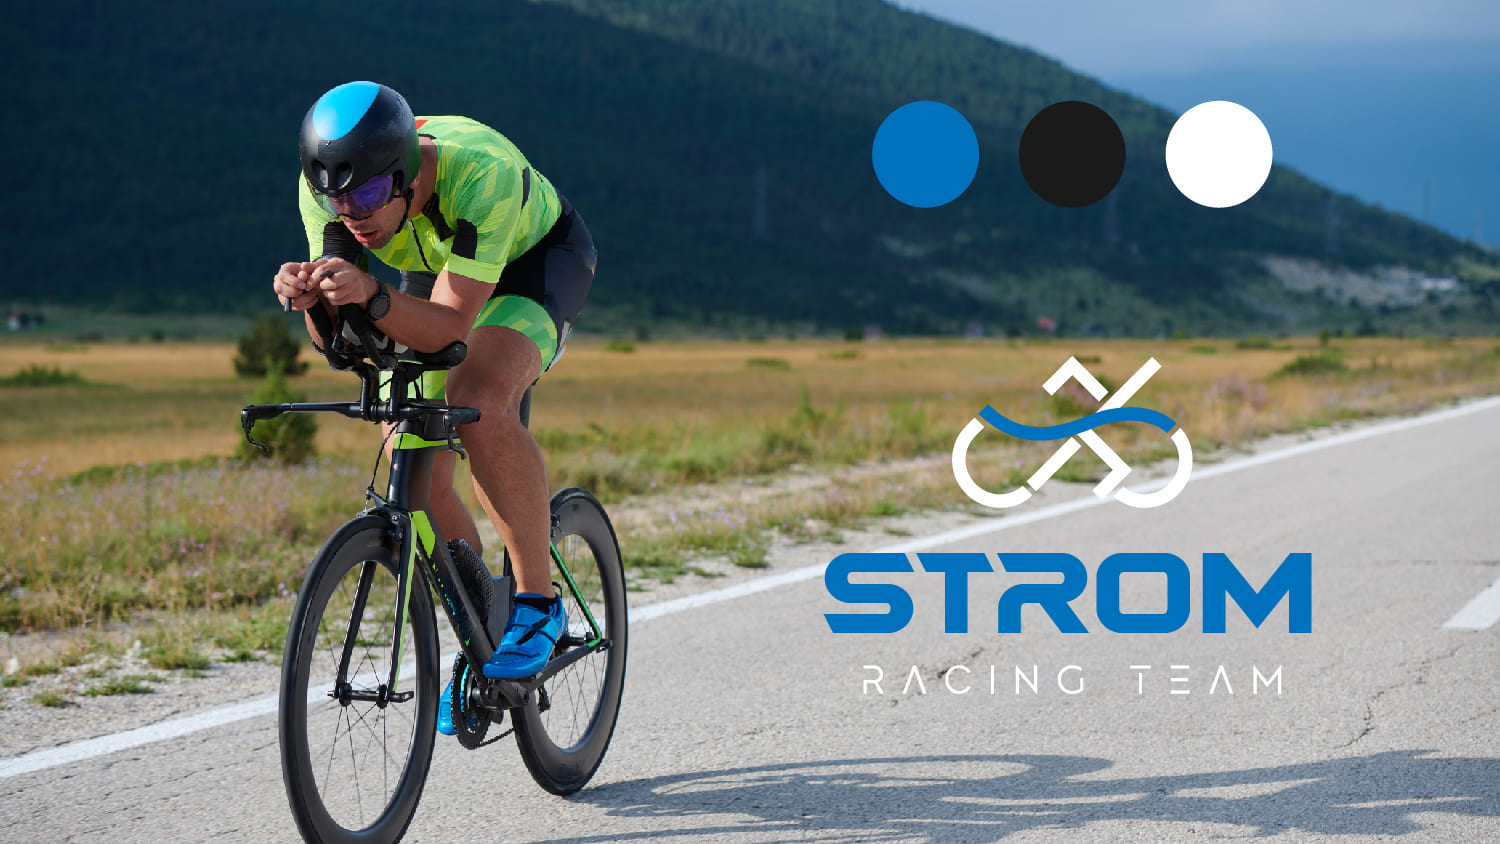 Cyclist on the road with the logo of Ström Racing Team next to